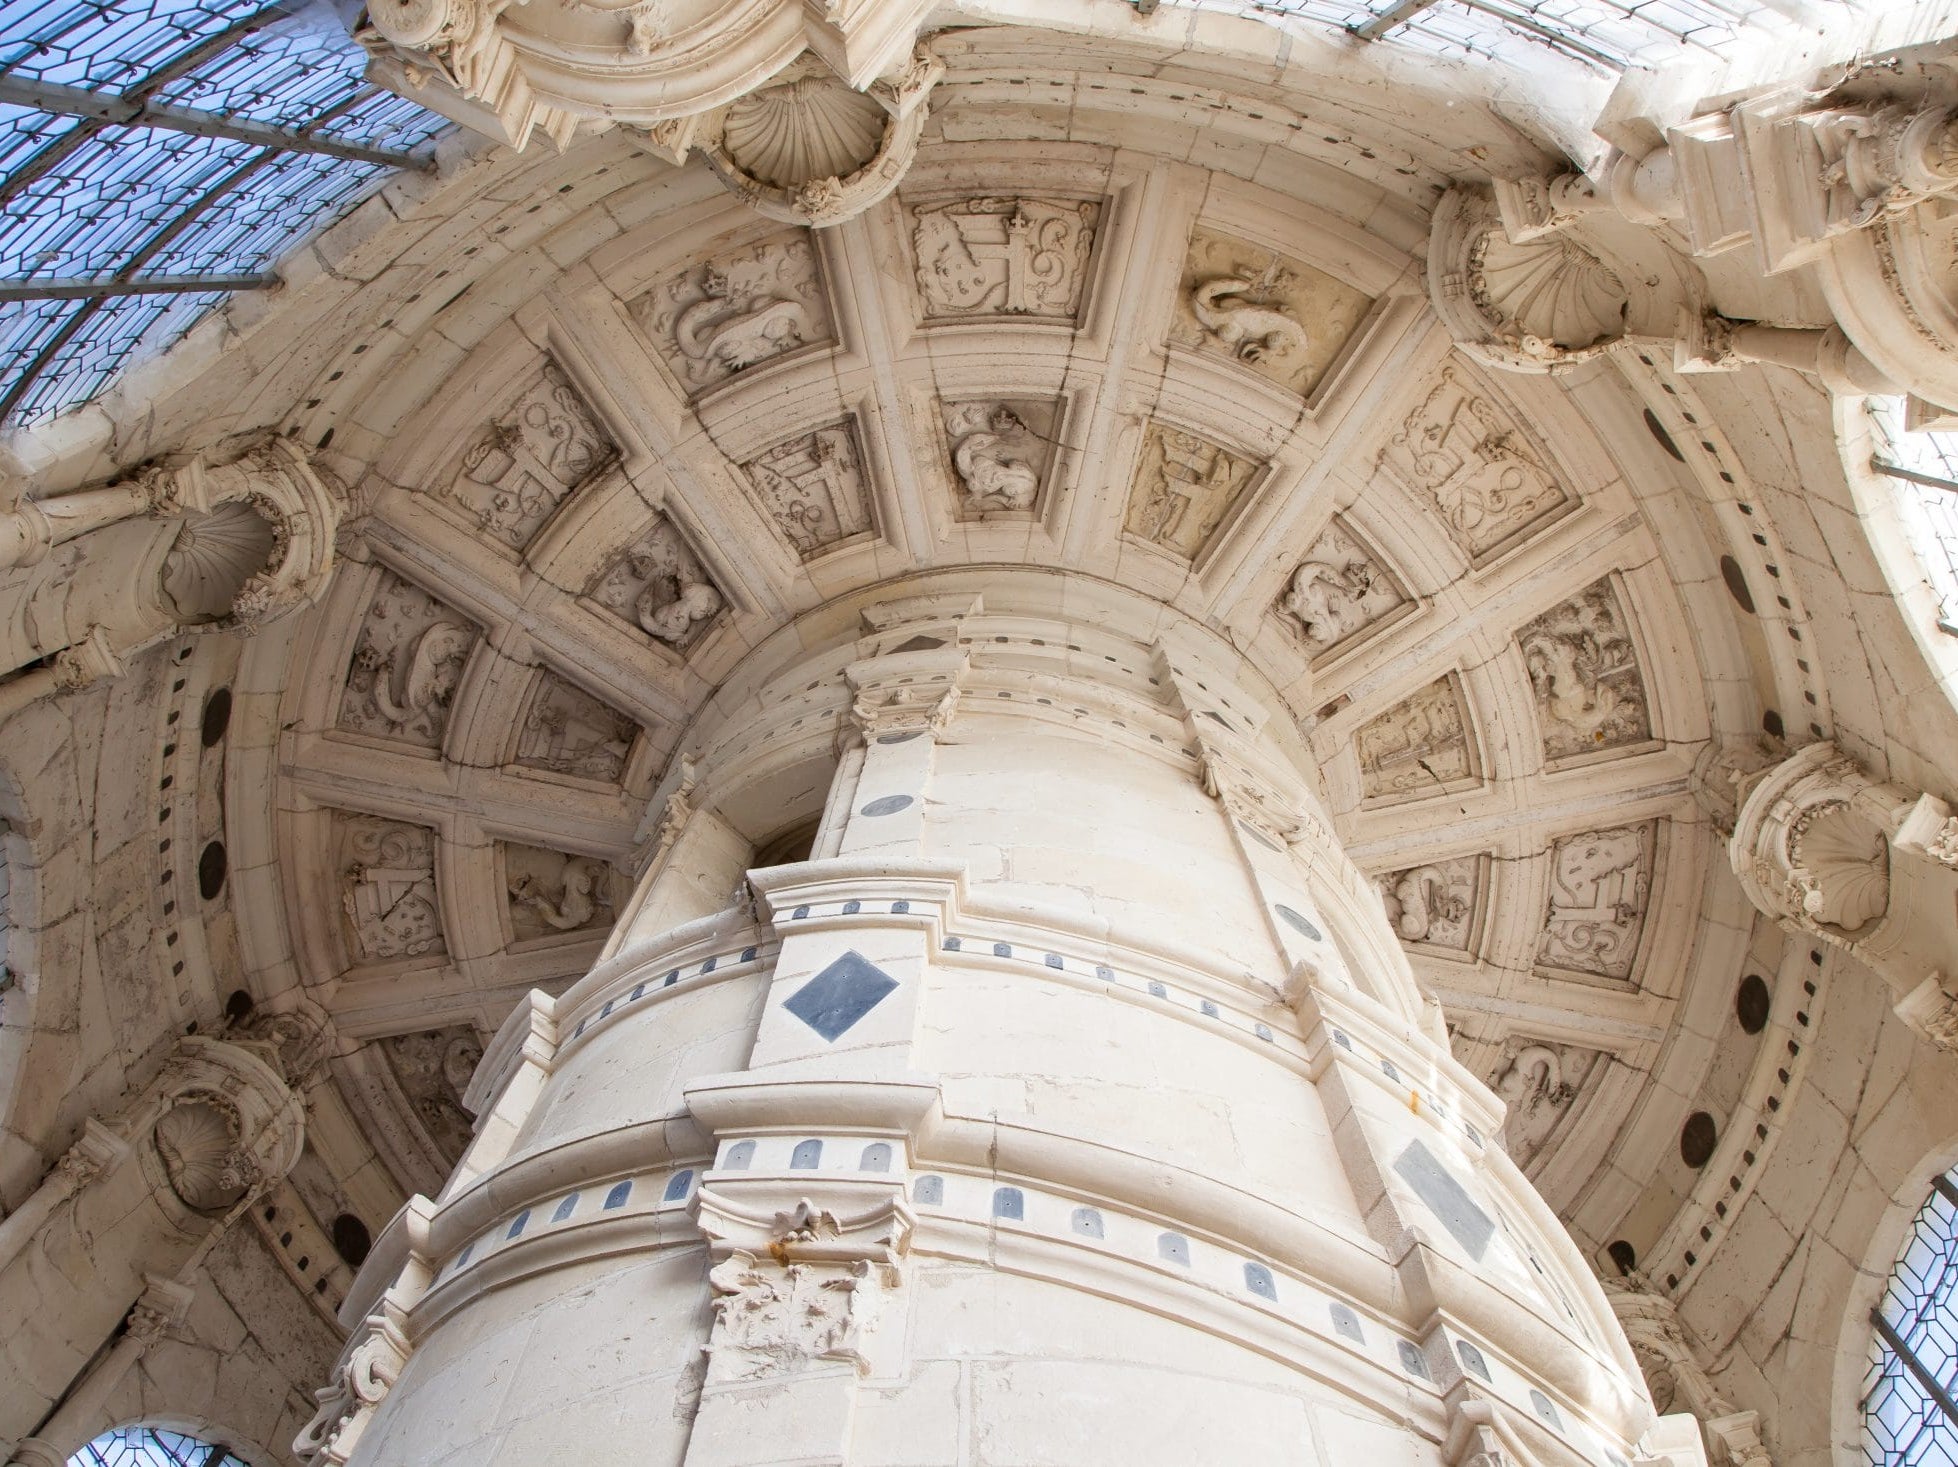 The double-spiral staircase is one of the highlights of Chambord